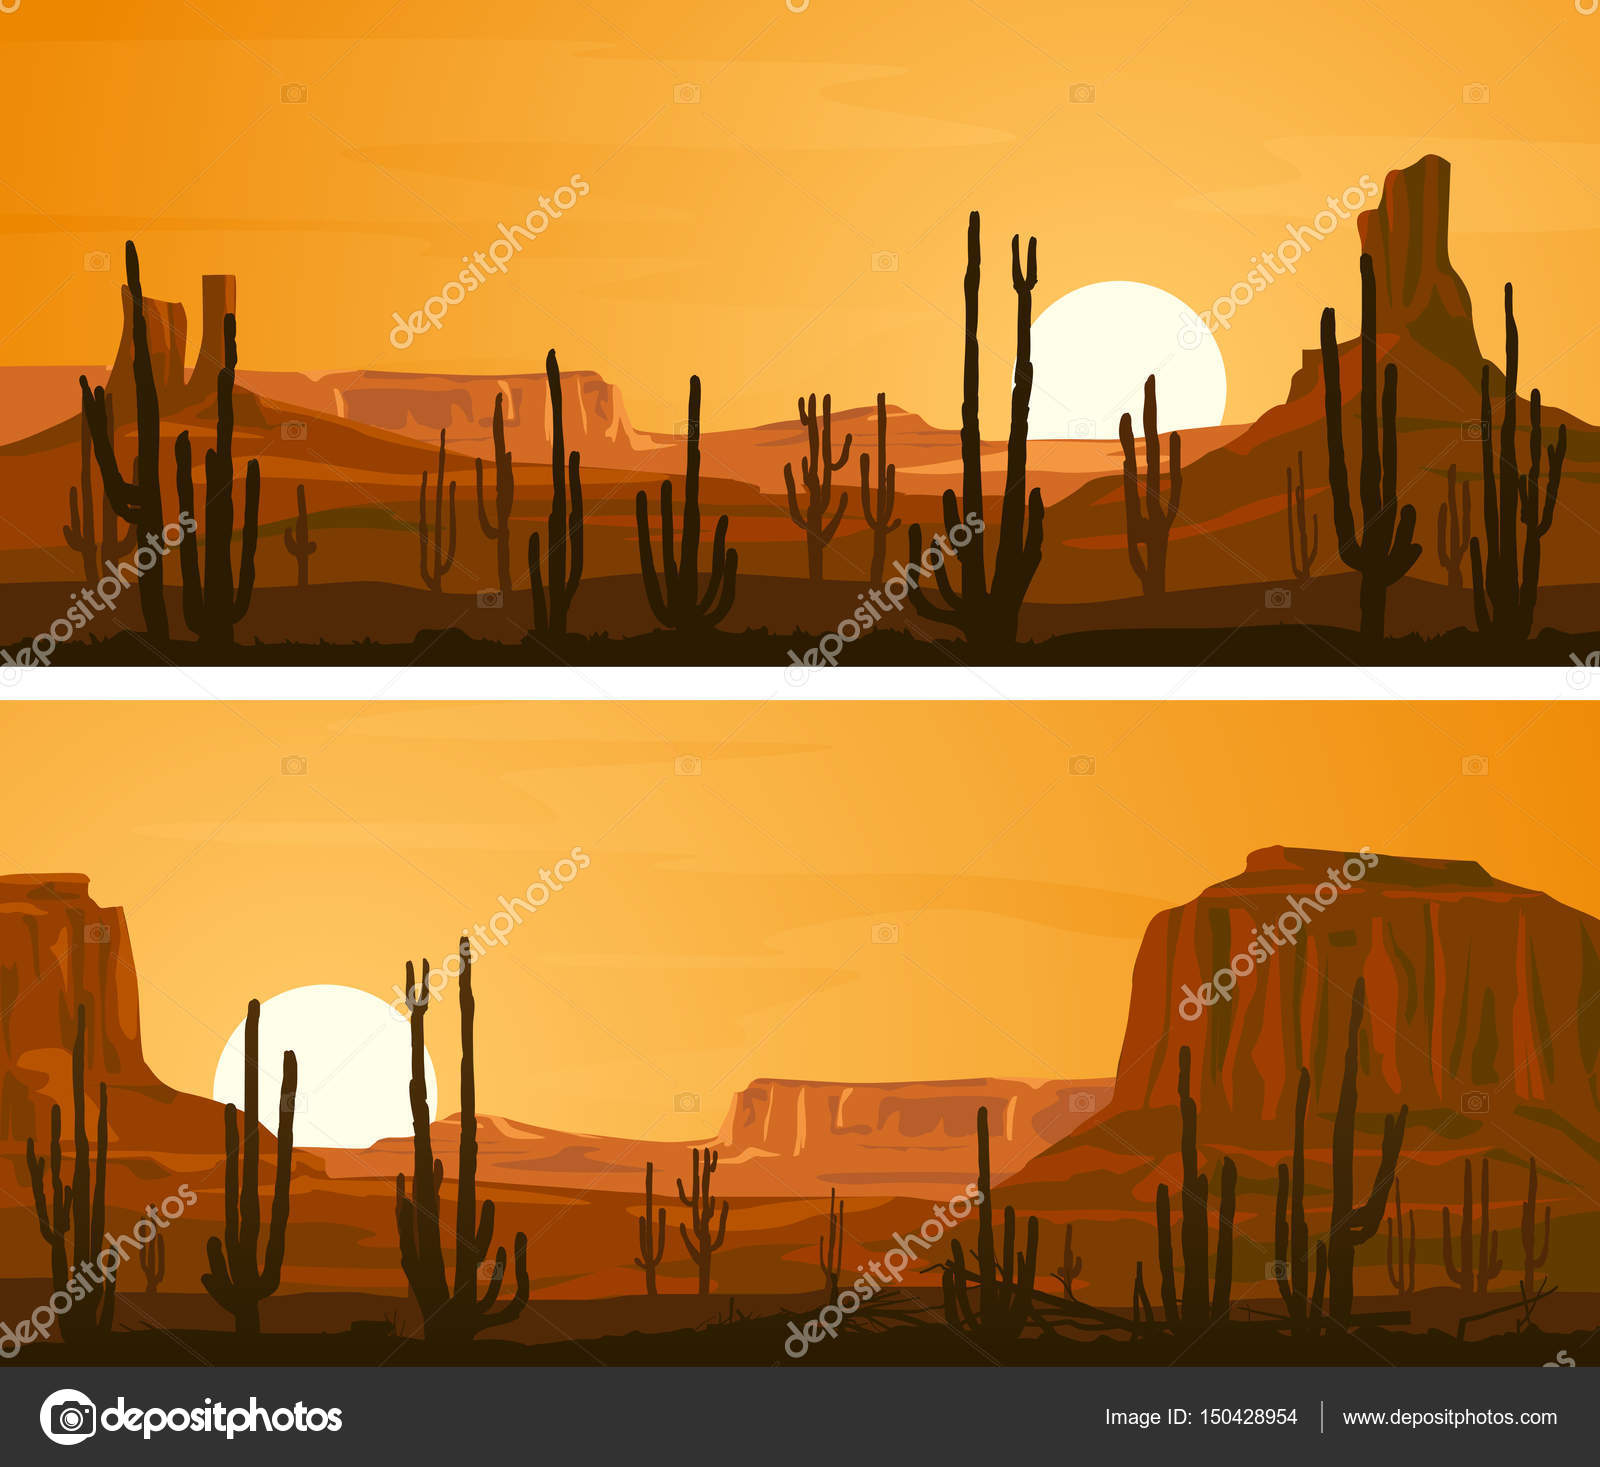 Horizontal Wide Banners With Illustration Of Prairie Wild West Vector Image By C Vertyr Vector Stock